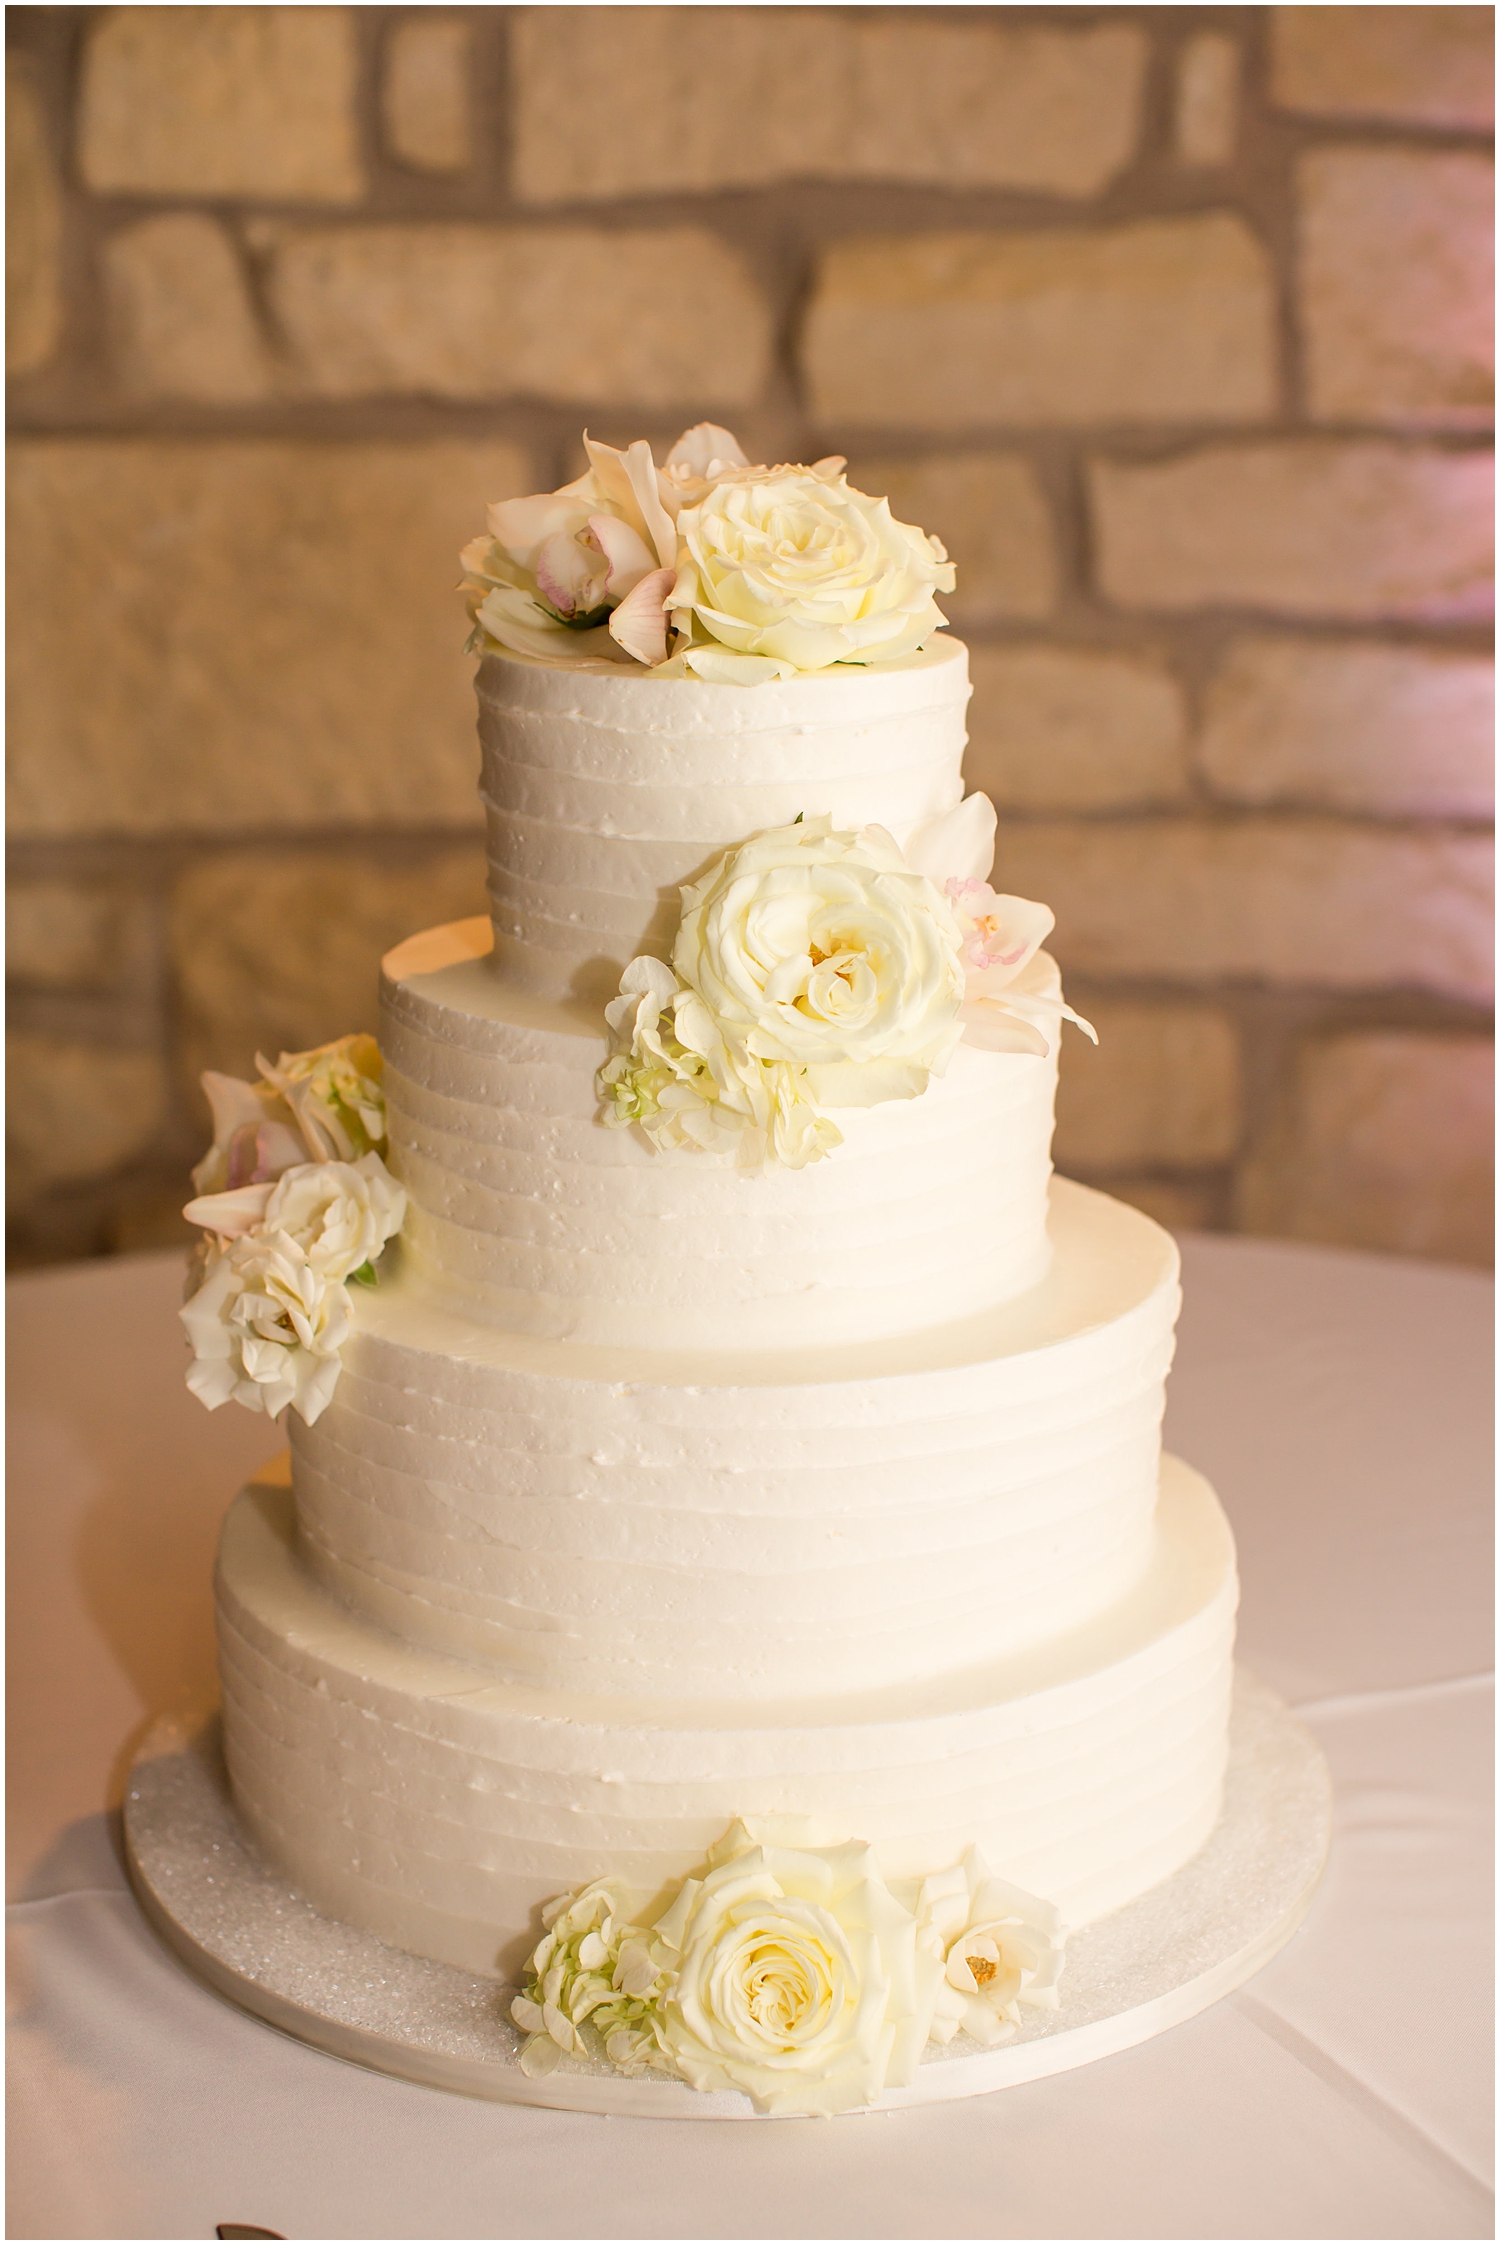 four tier white wedding cake with frosting texture and white roses and hydrangeas for wedding day reception